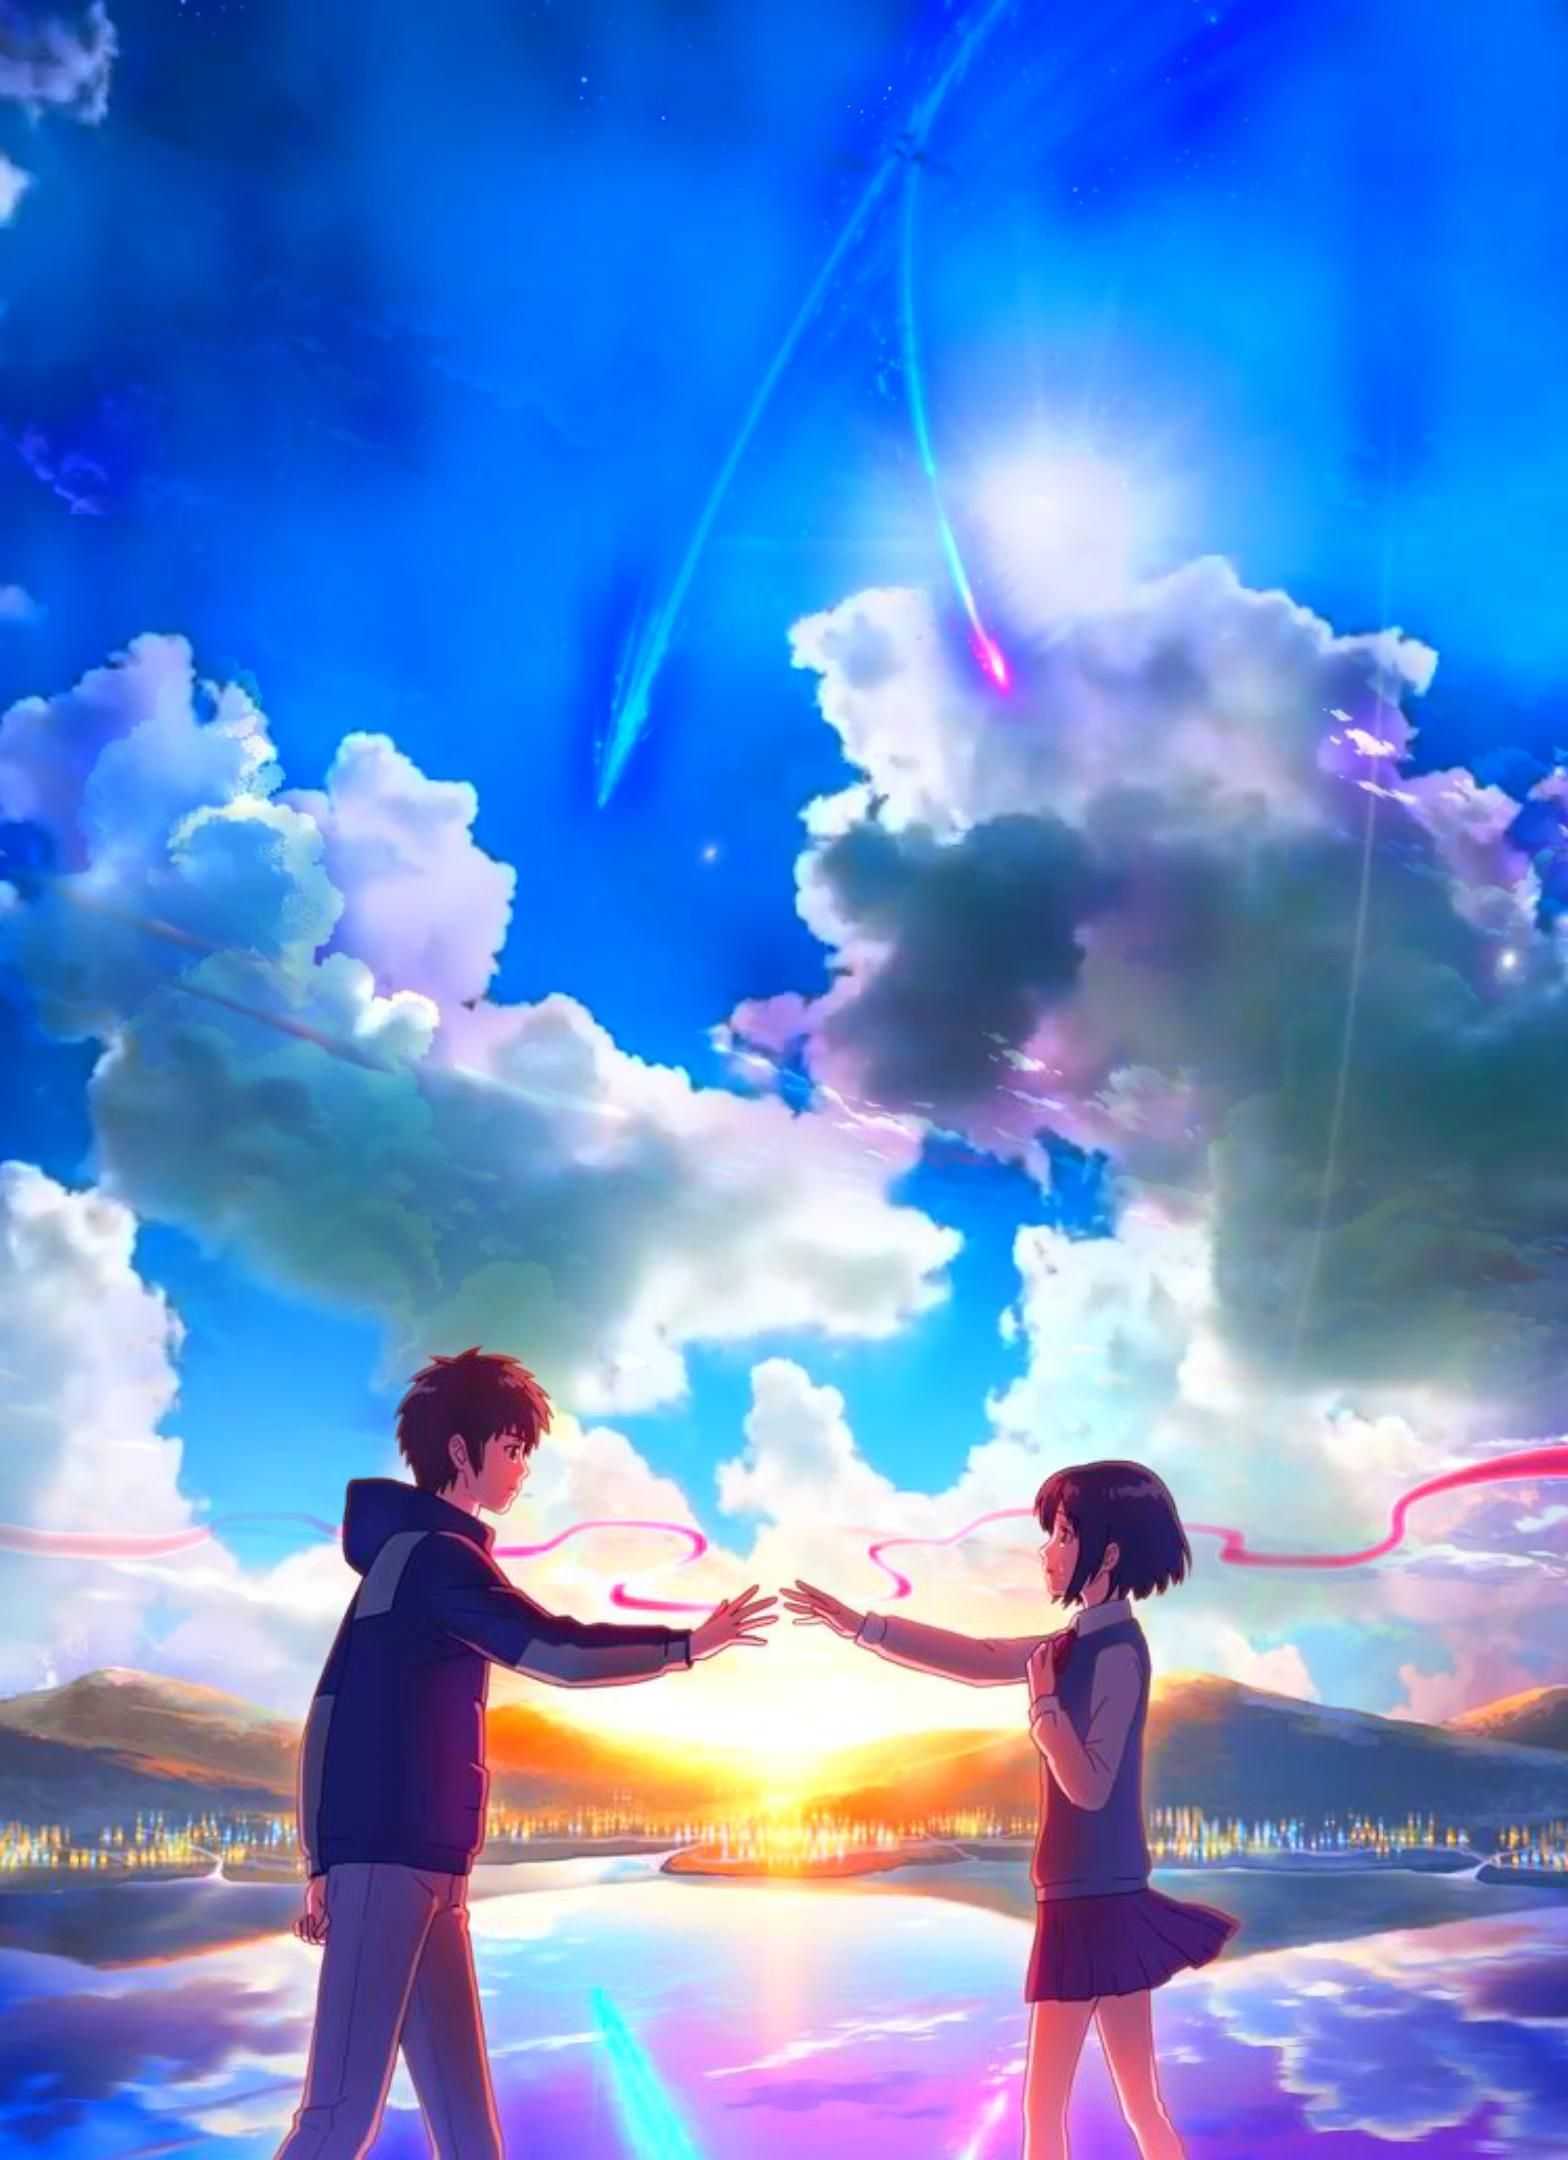 Your Name Wallpaper Kolpaper Awesome Free Hd Wallpapers